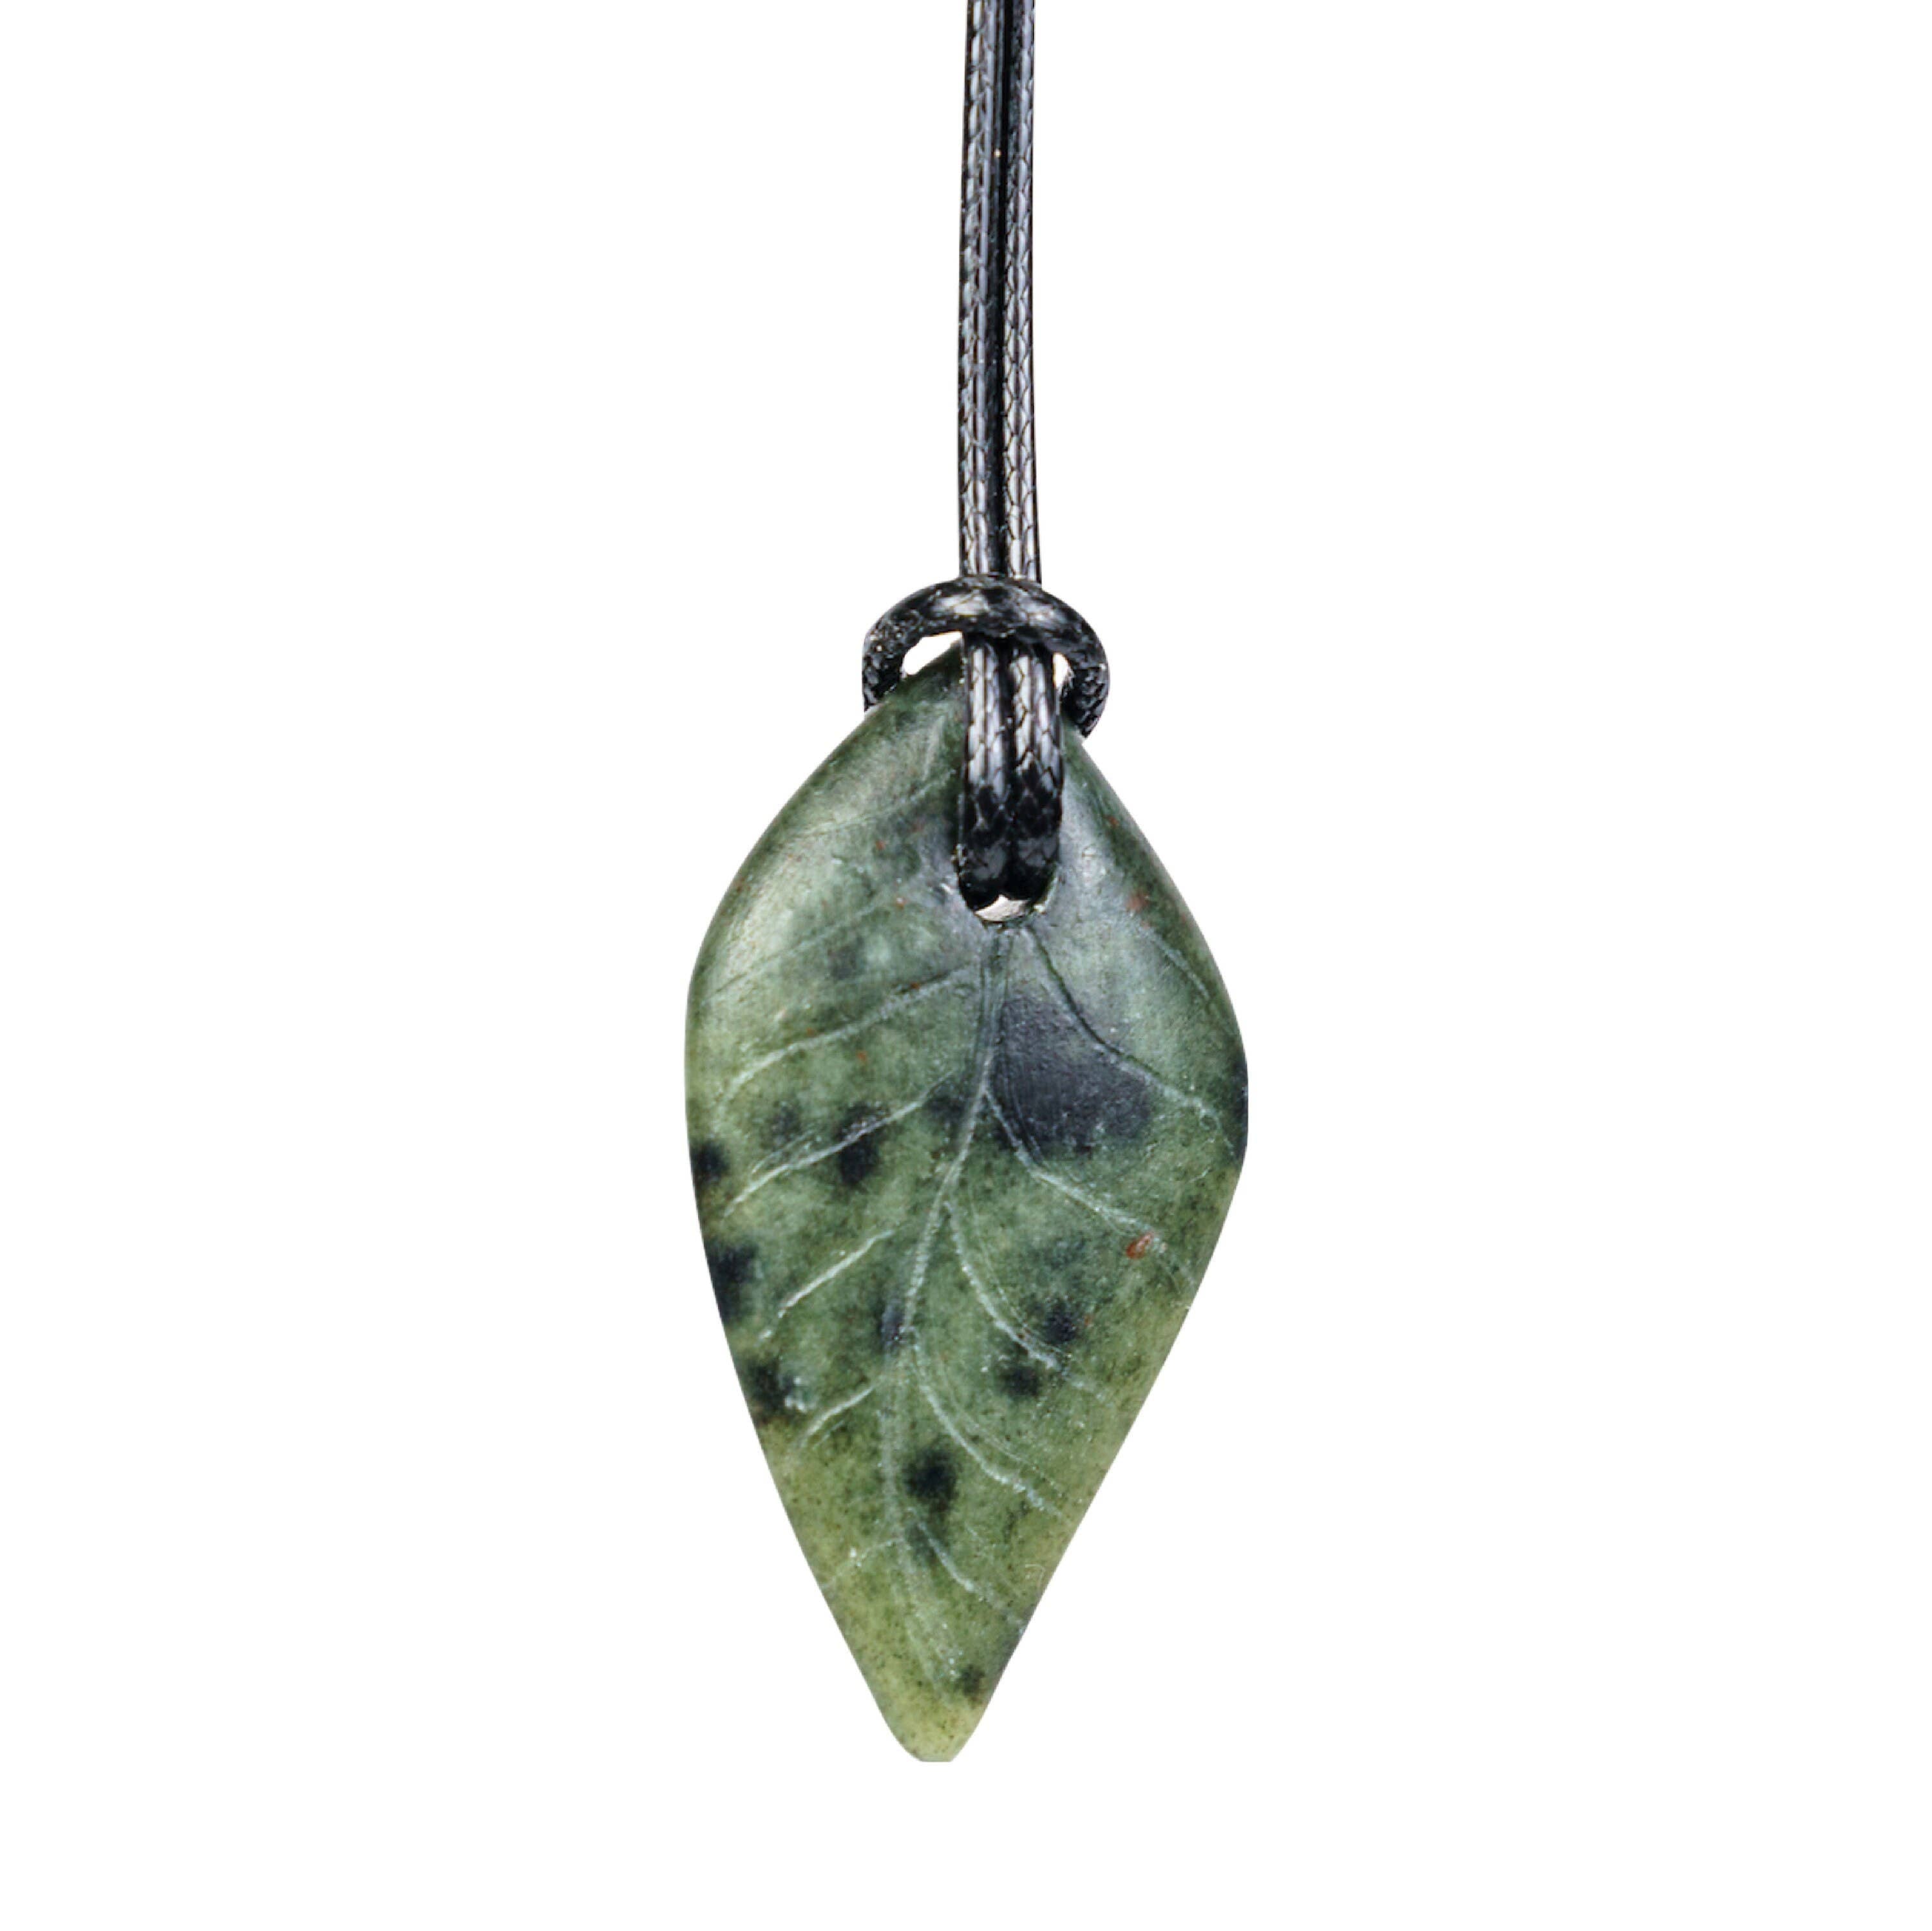 NEW! Leaf Soapstone Pendant Jewelry Kit Carving and Whittlin